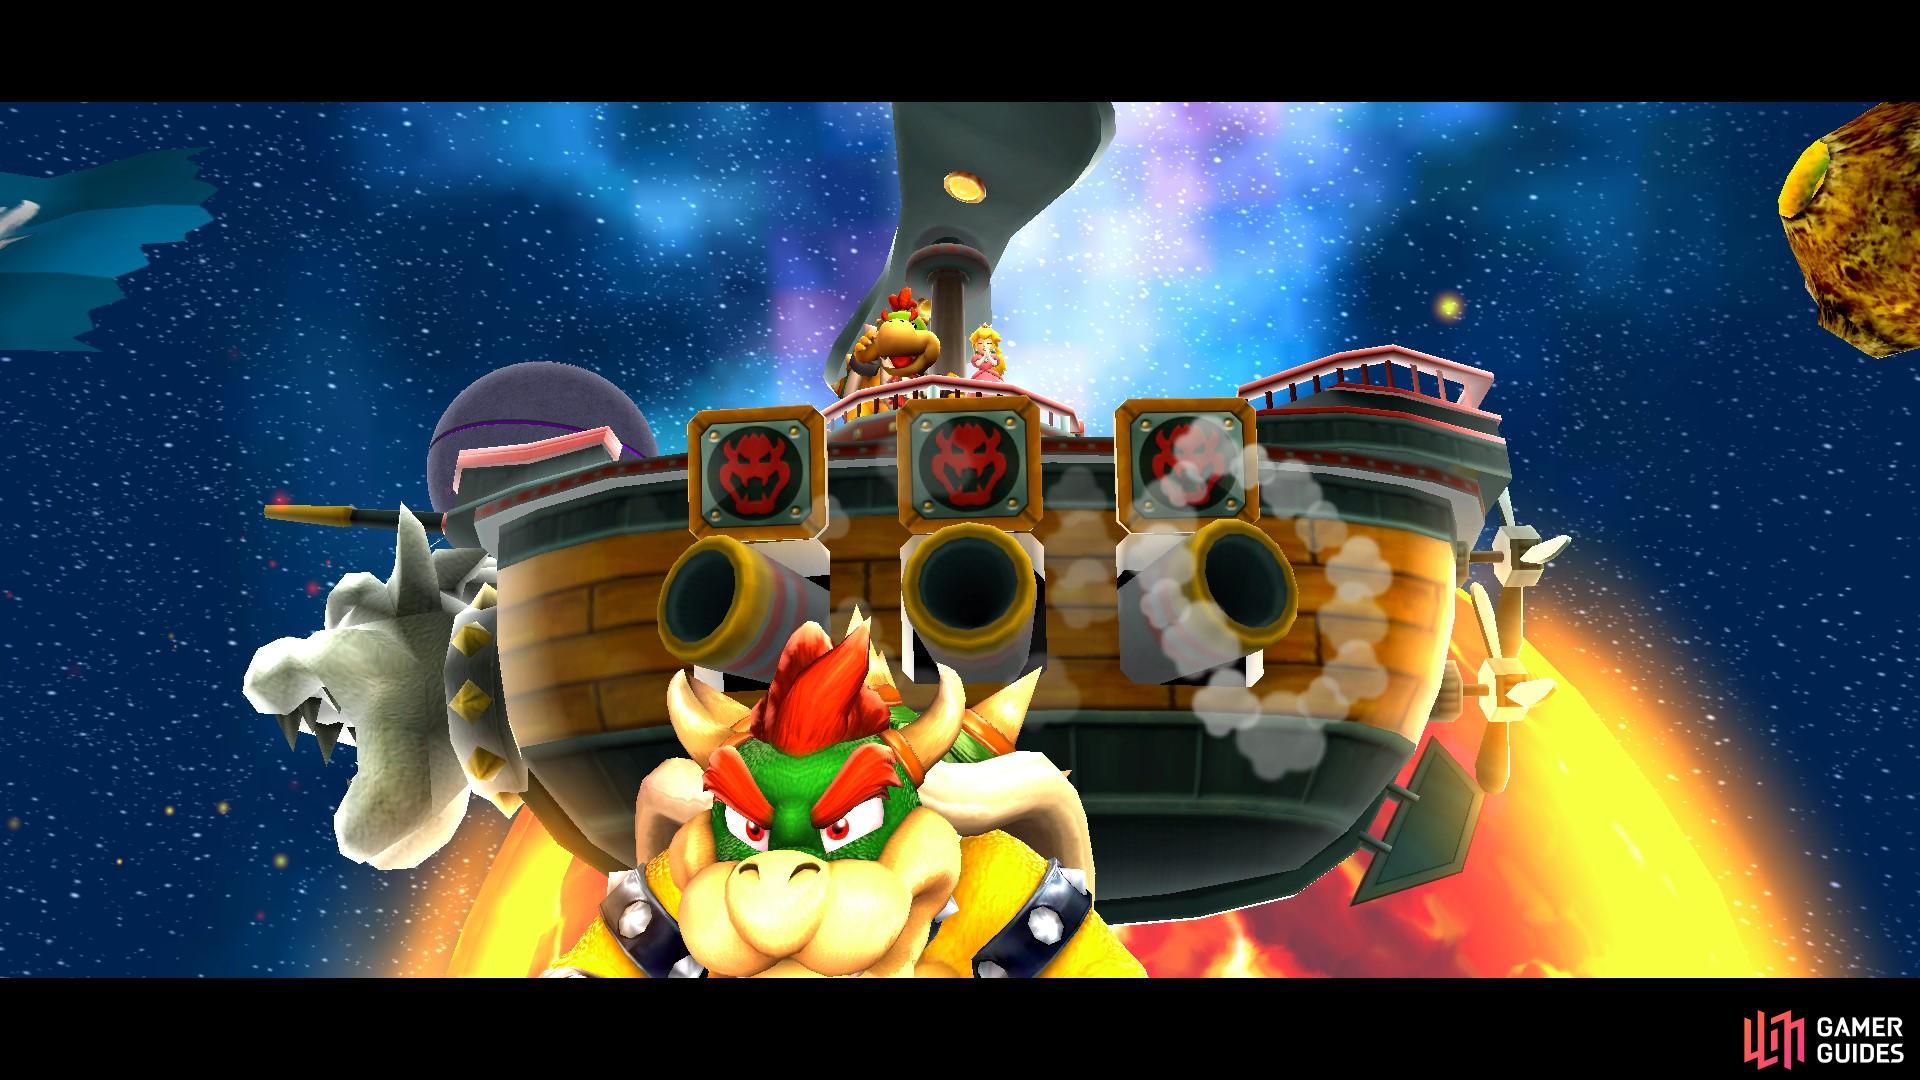 The Fate of the Universe is where you'll have your final fight with Bowser!